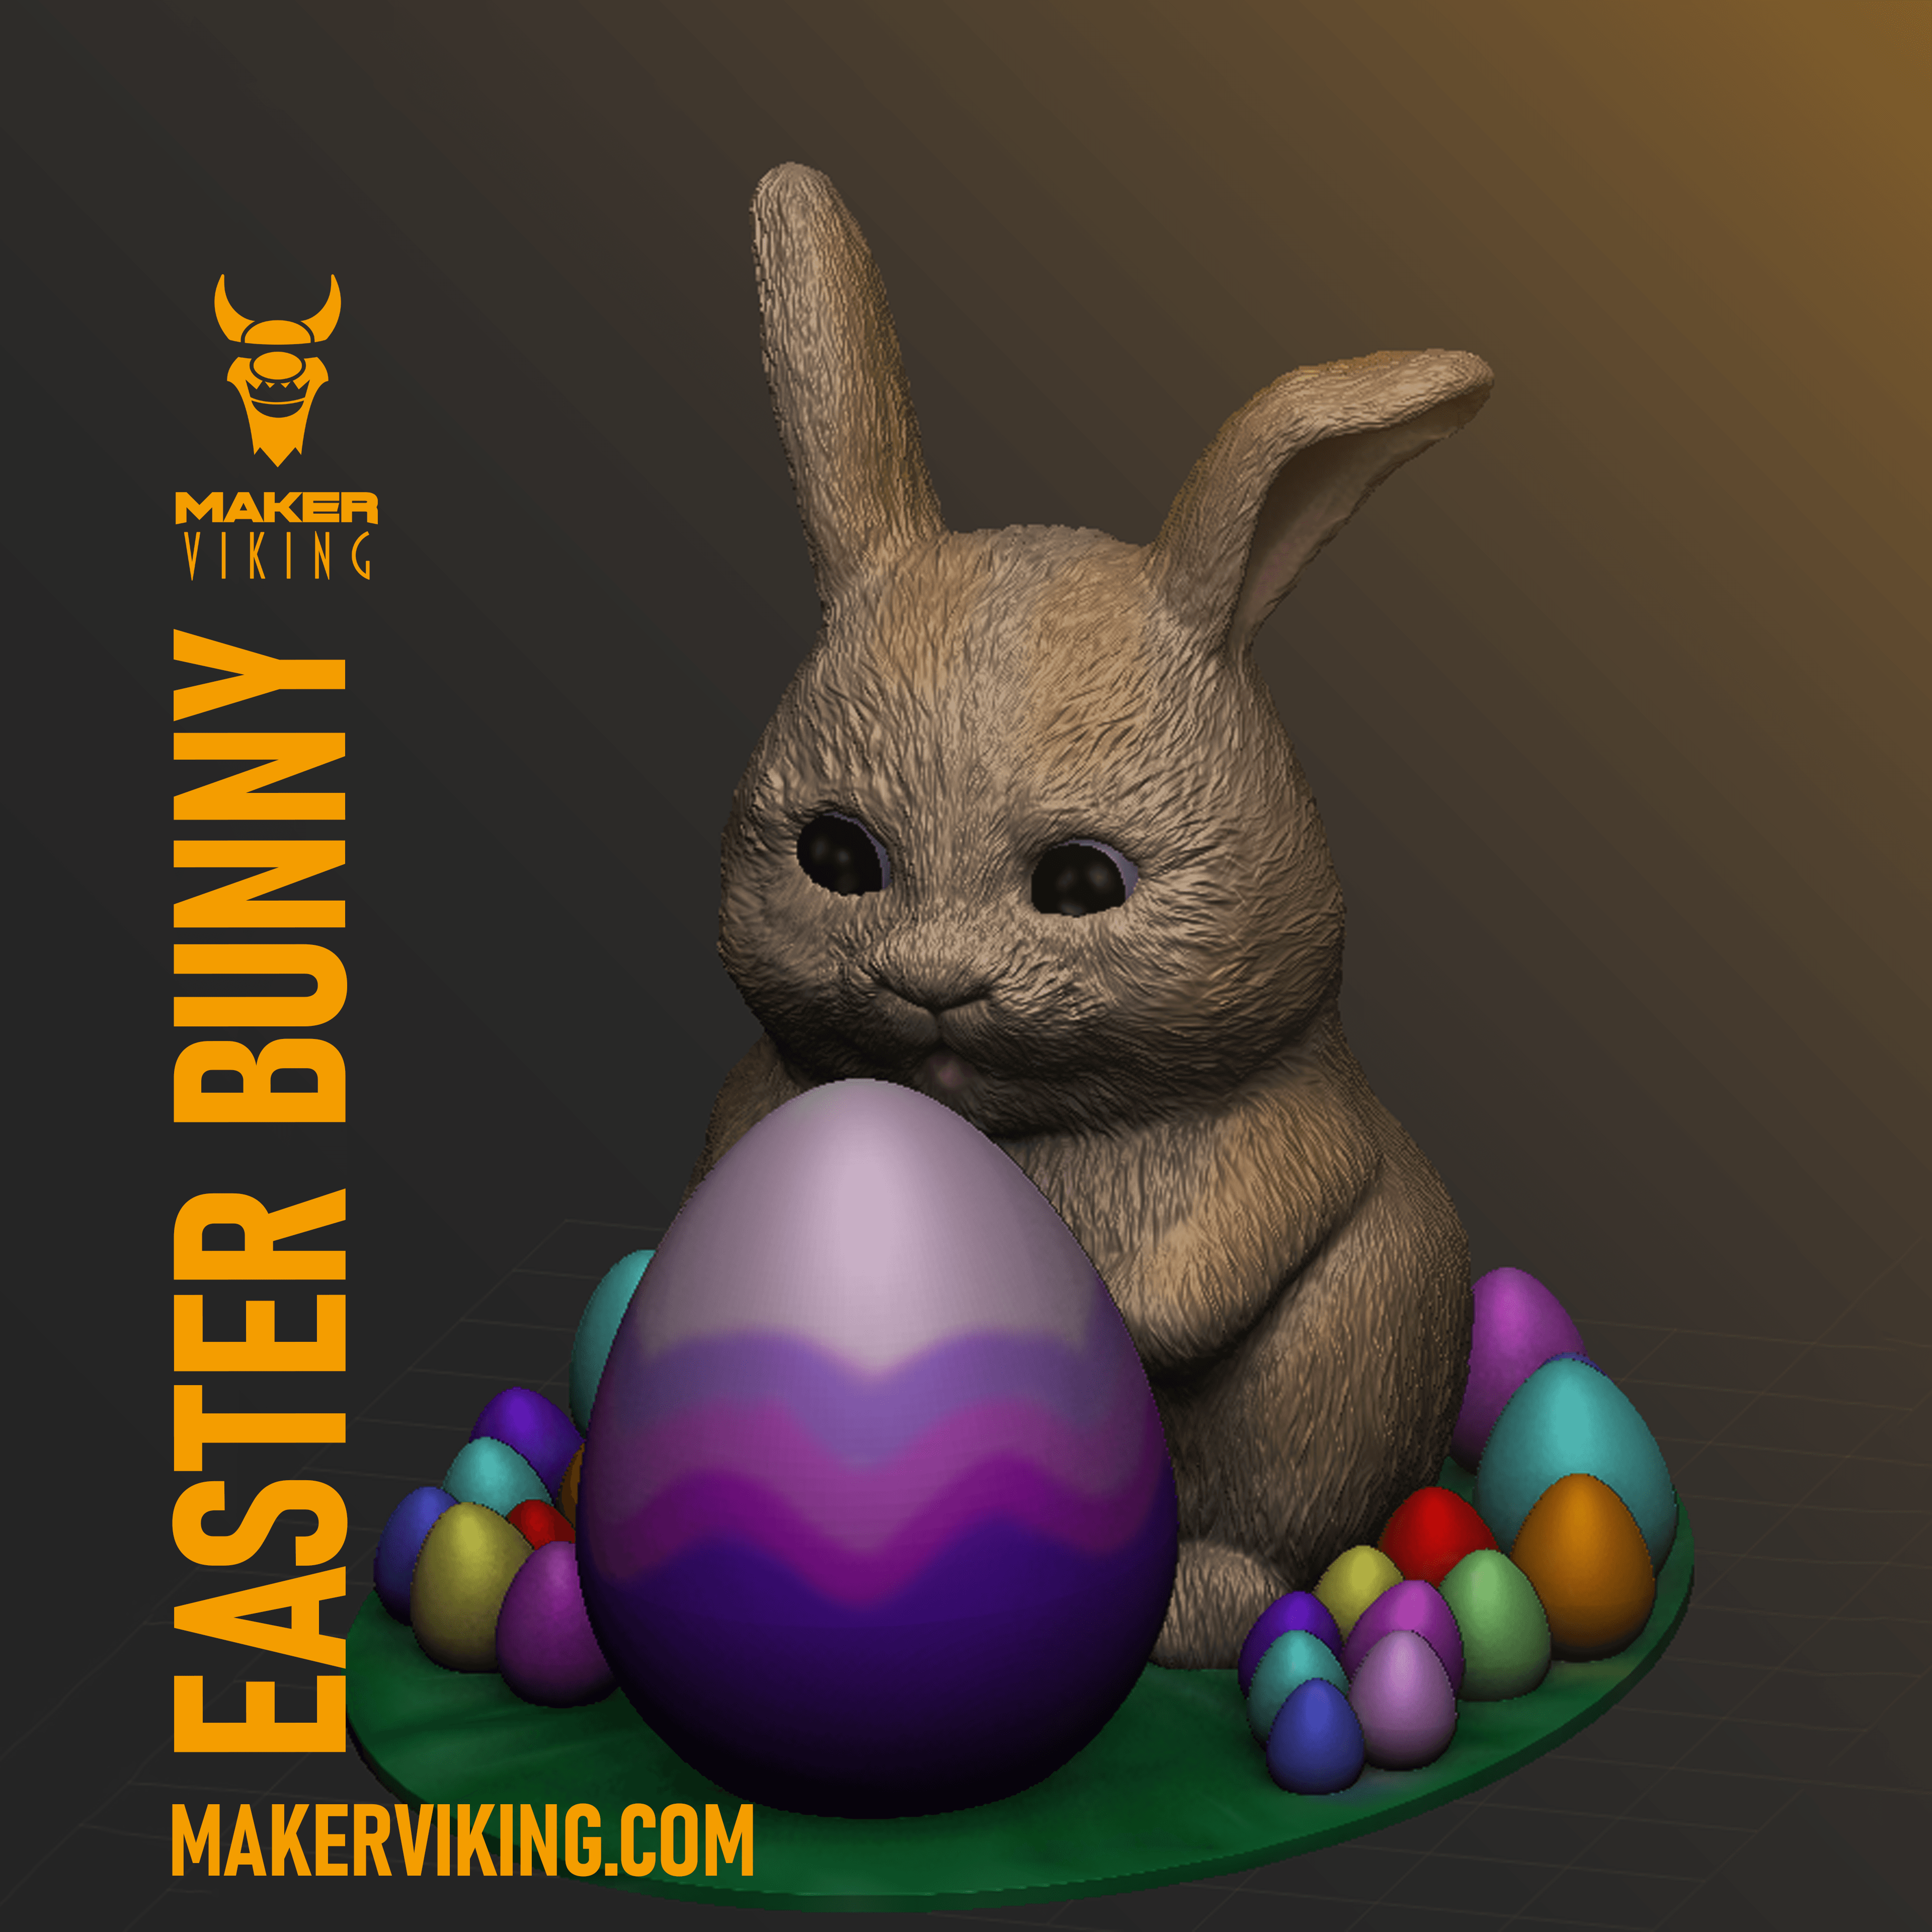 New model - The Cute Easter Bunny